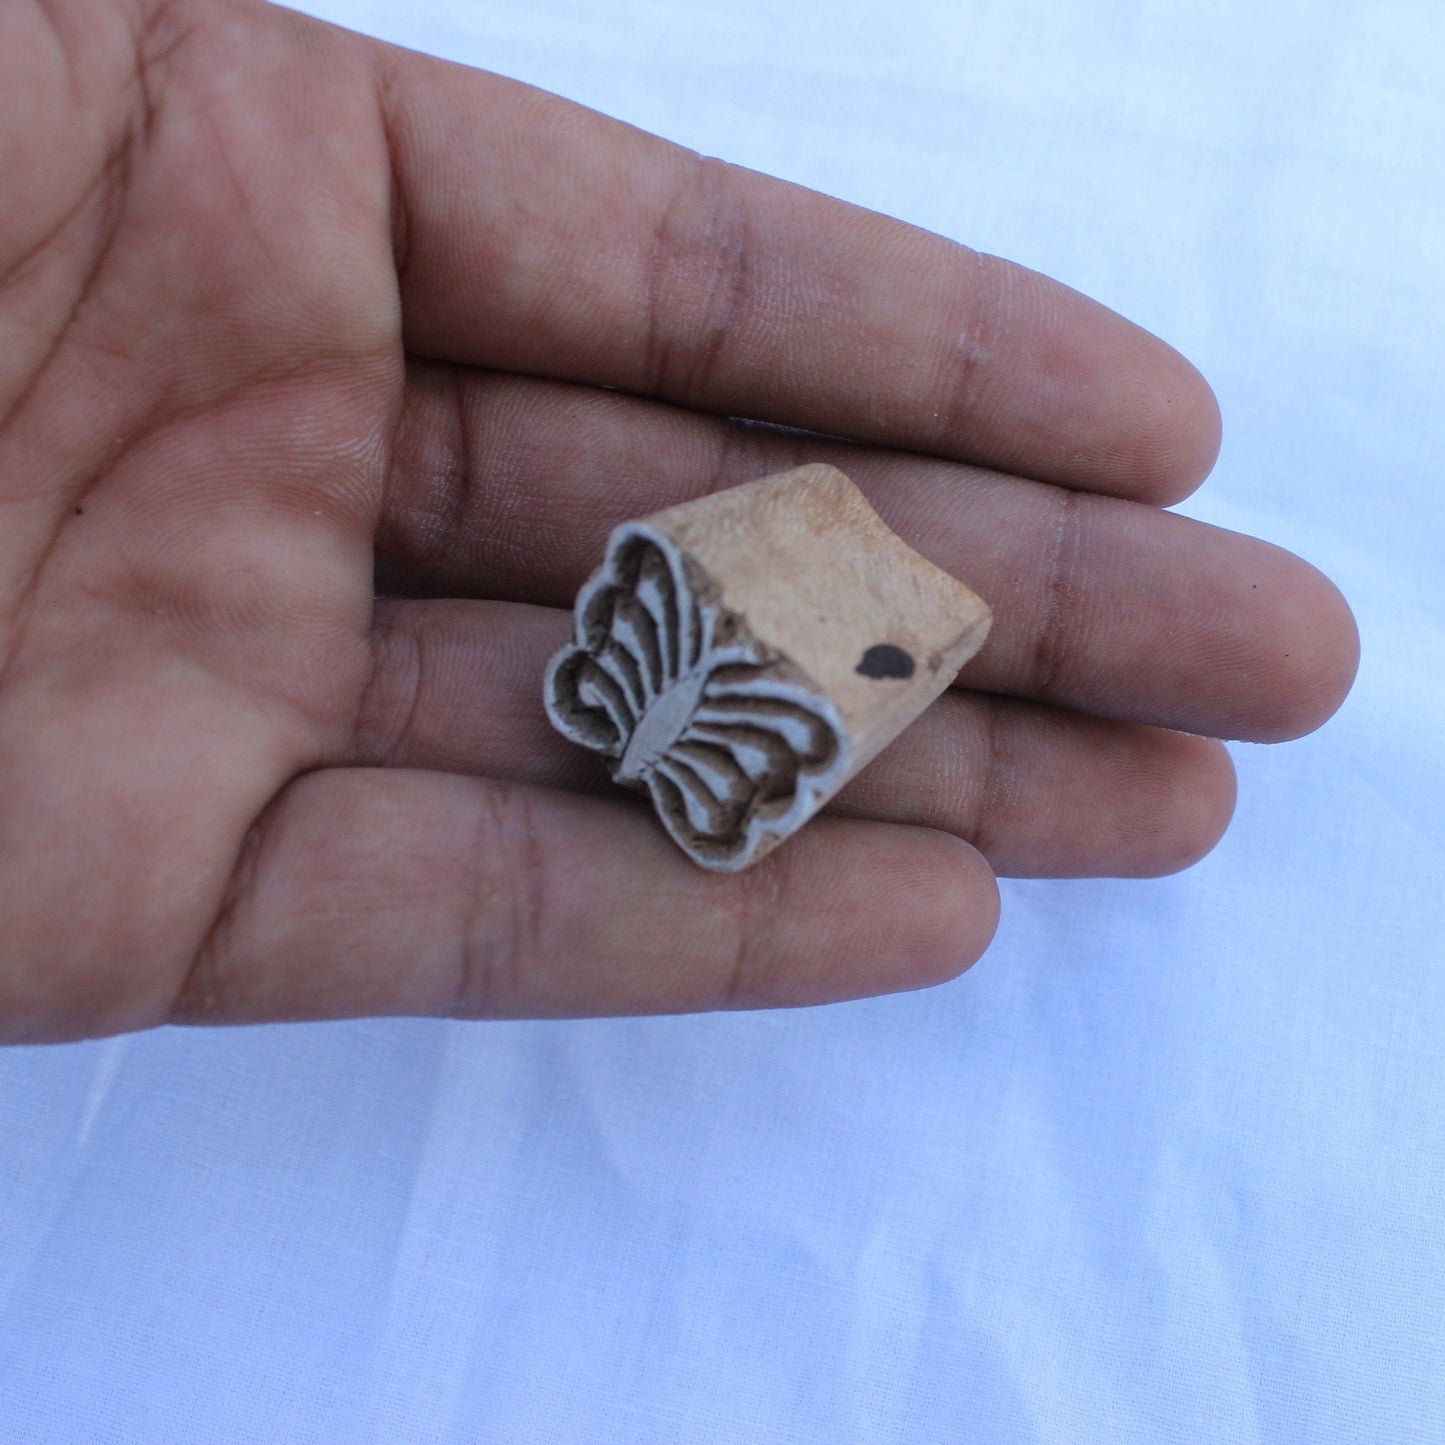 Butterfly Fabric Print Stamp Hand Carved Wood Block Stamp Insect Block Stamp Hand Carved Textile Printing Block For Printing Kids Soap Stamp